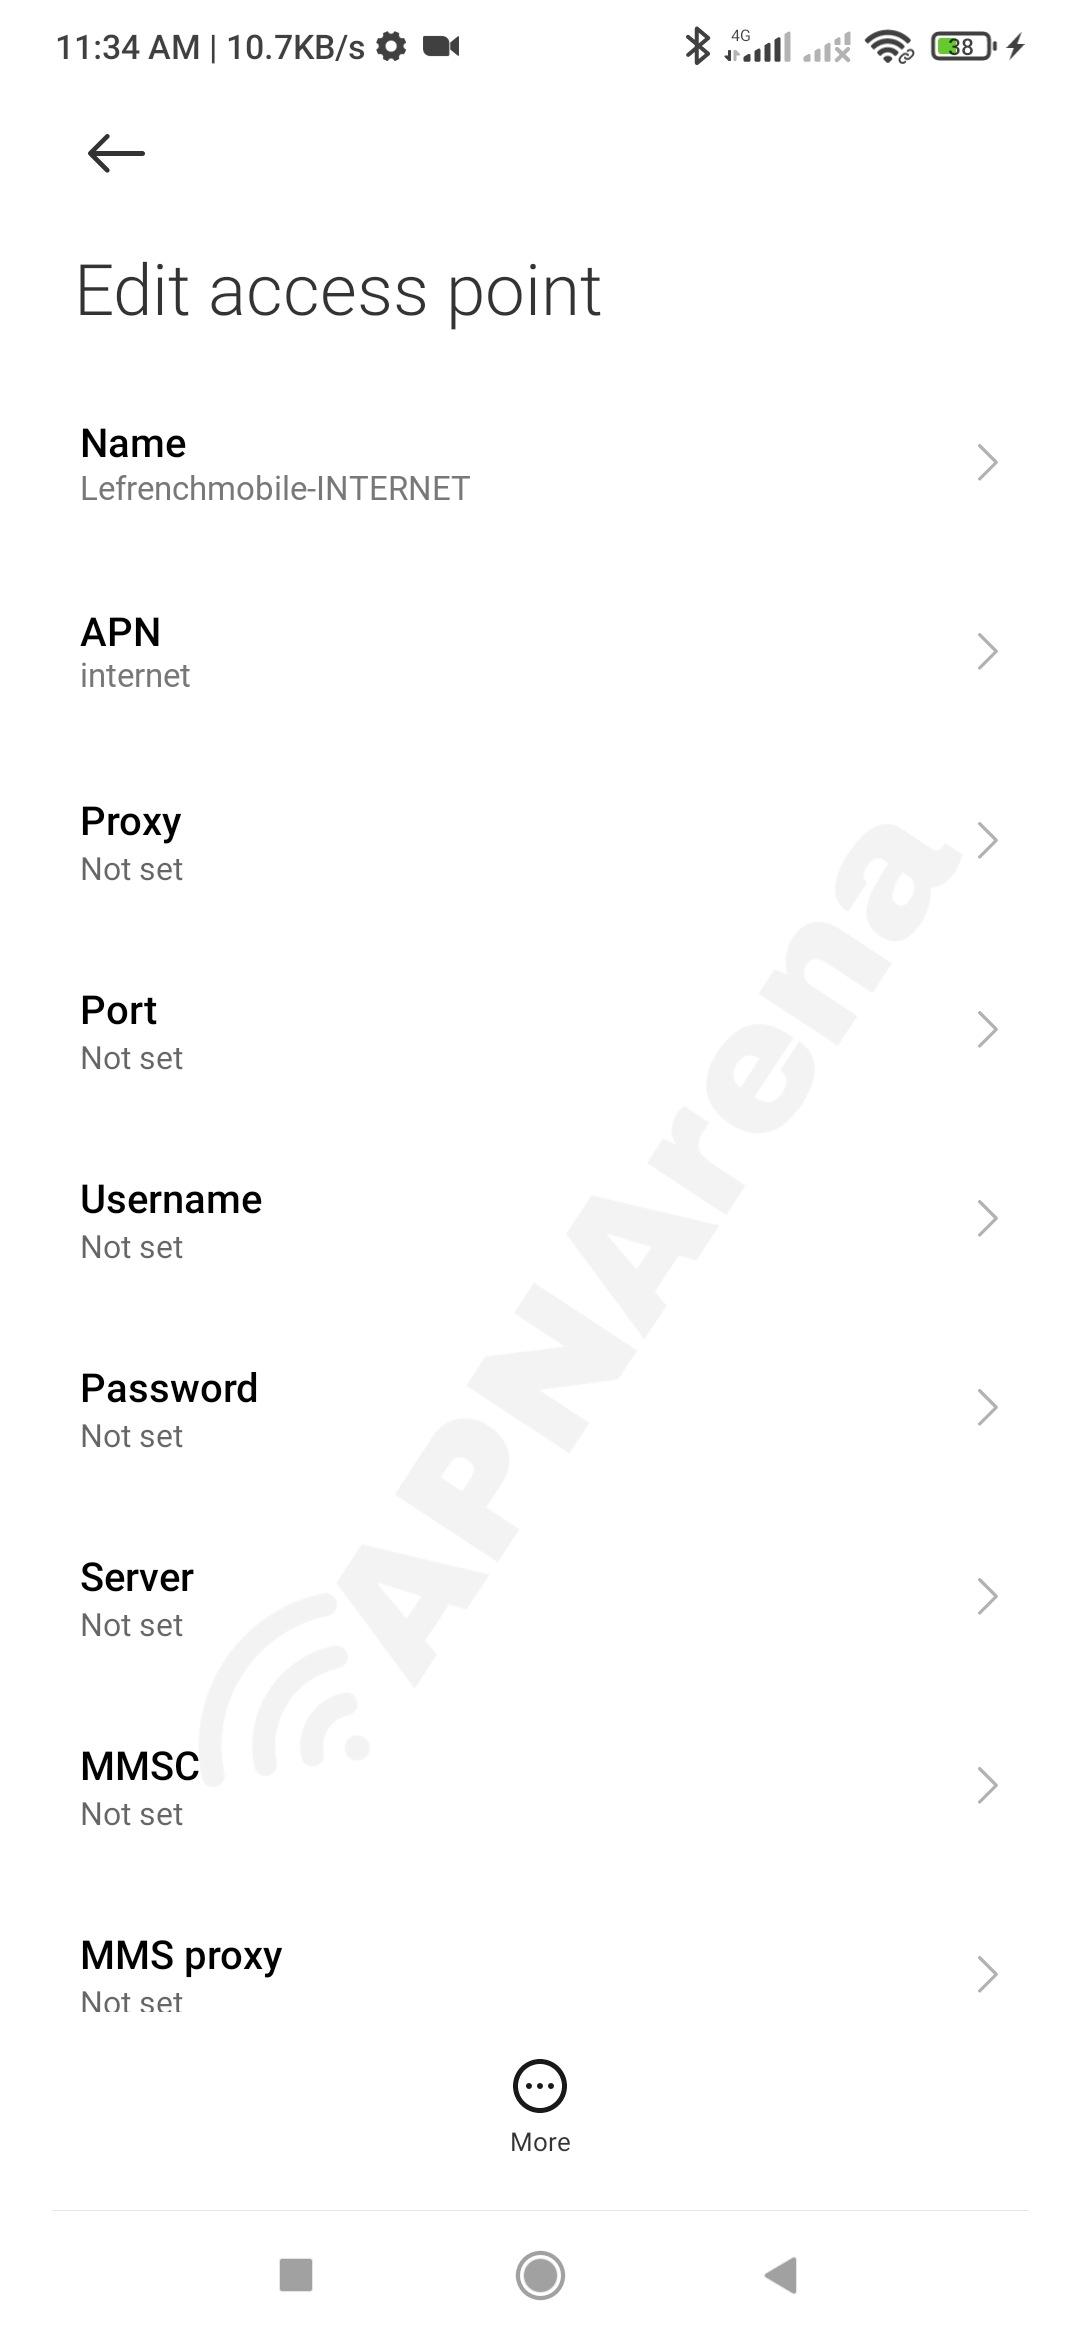 LeFrenchMobile APN Settings for Android